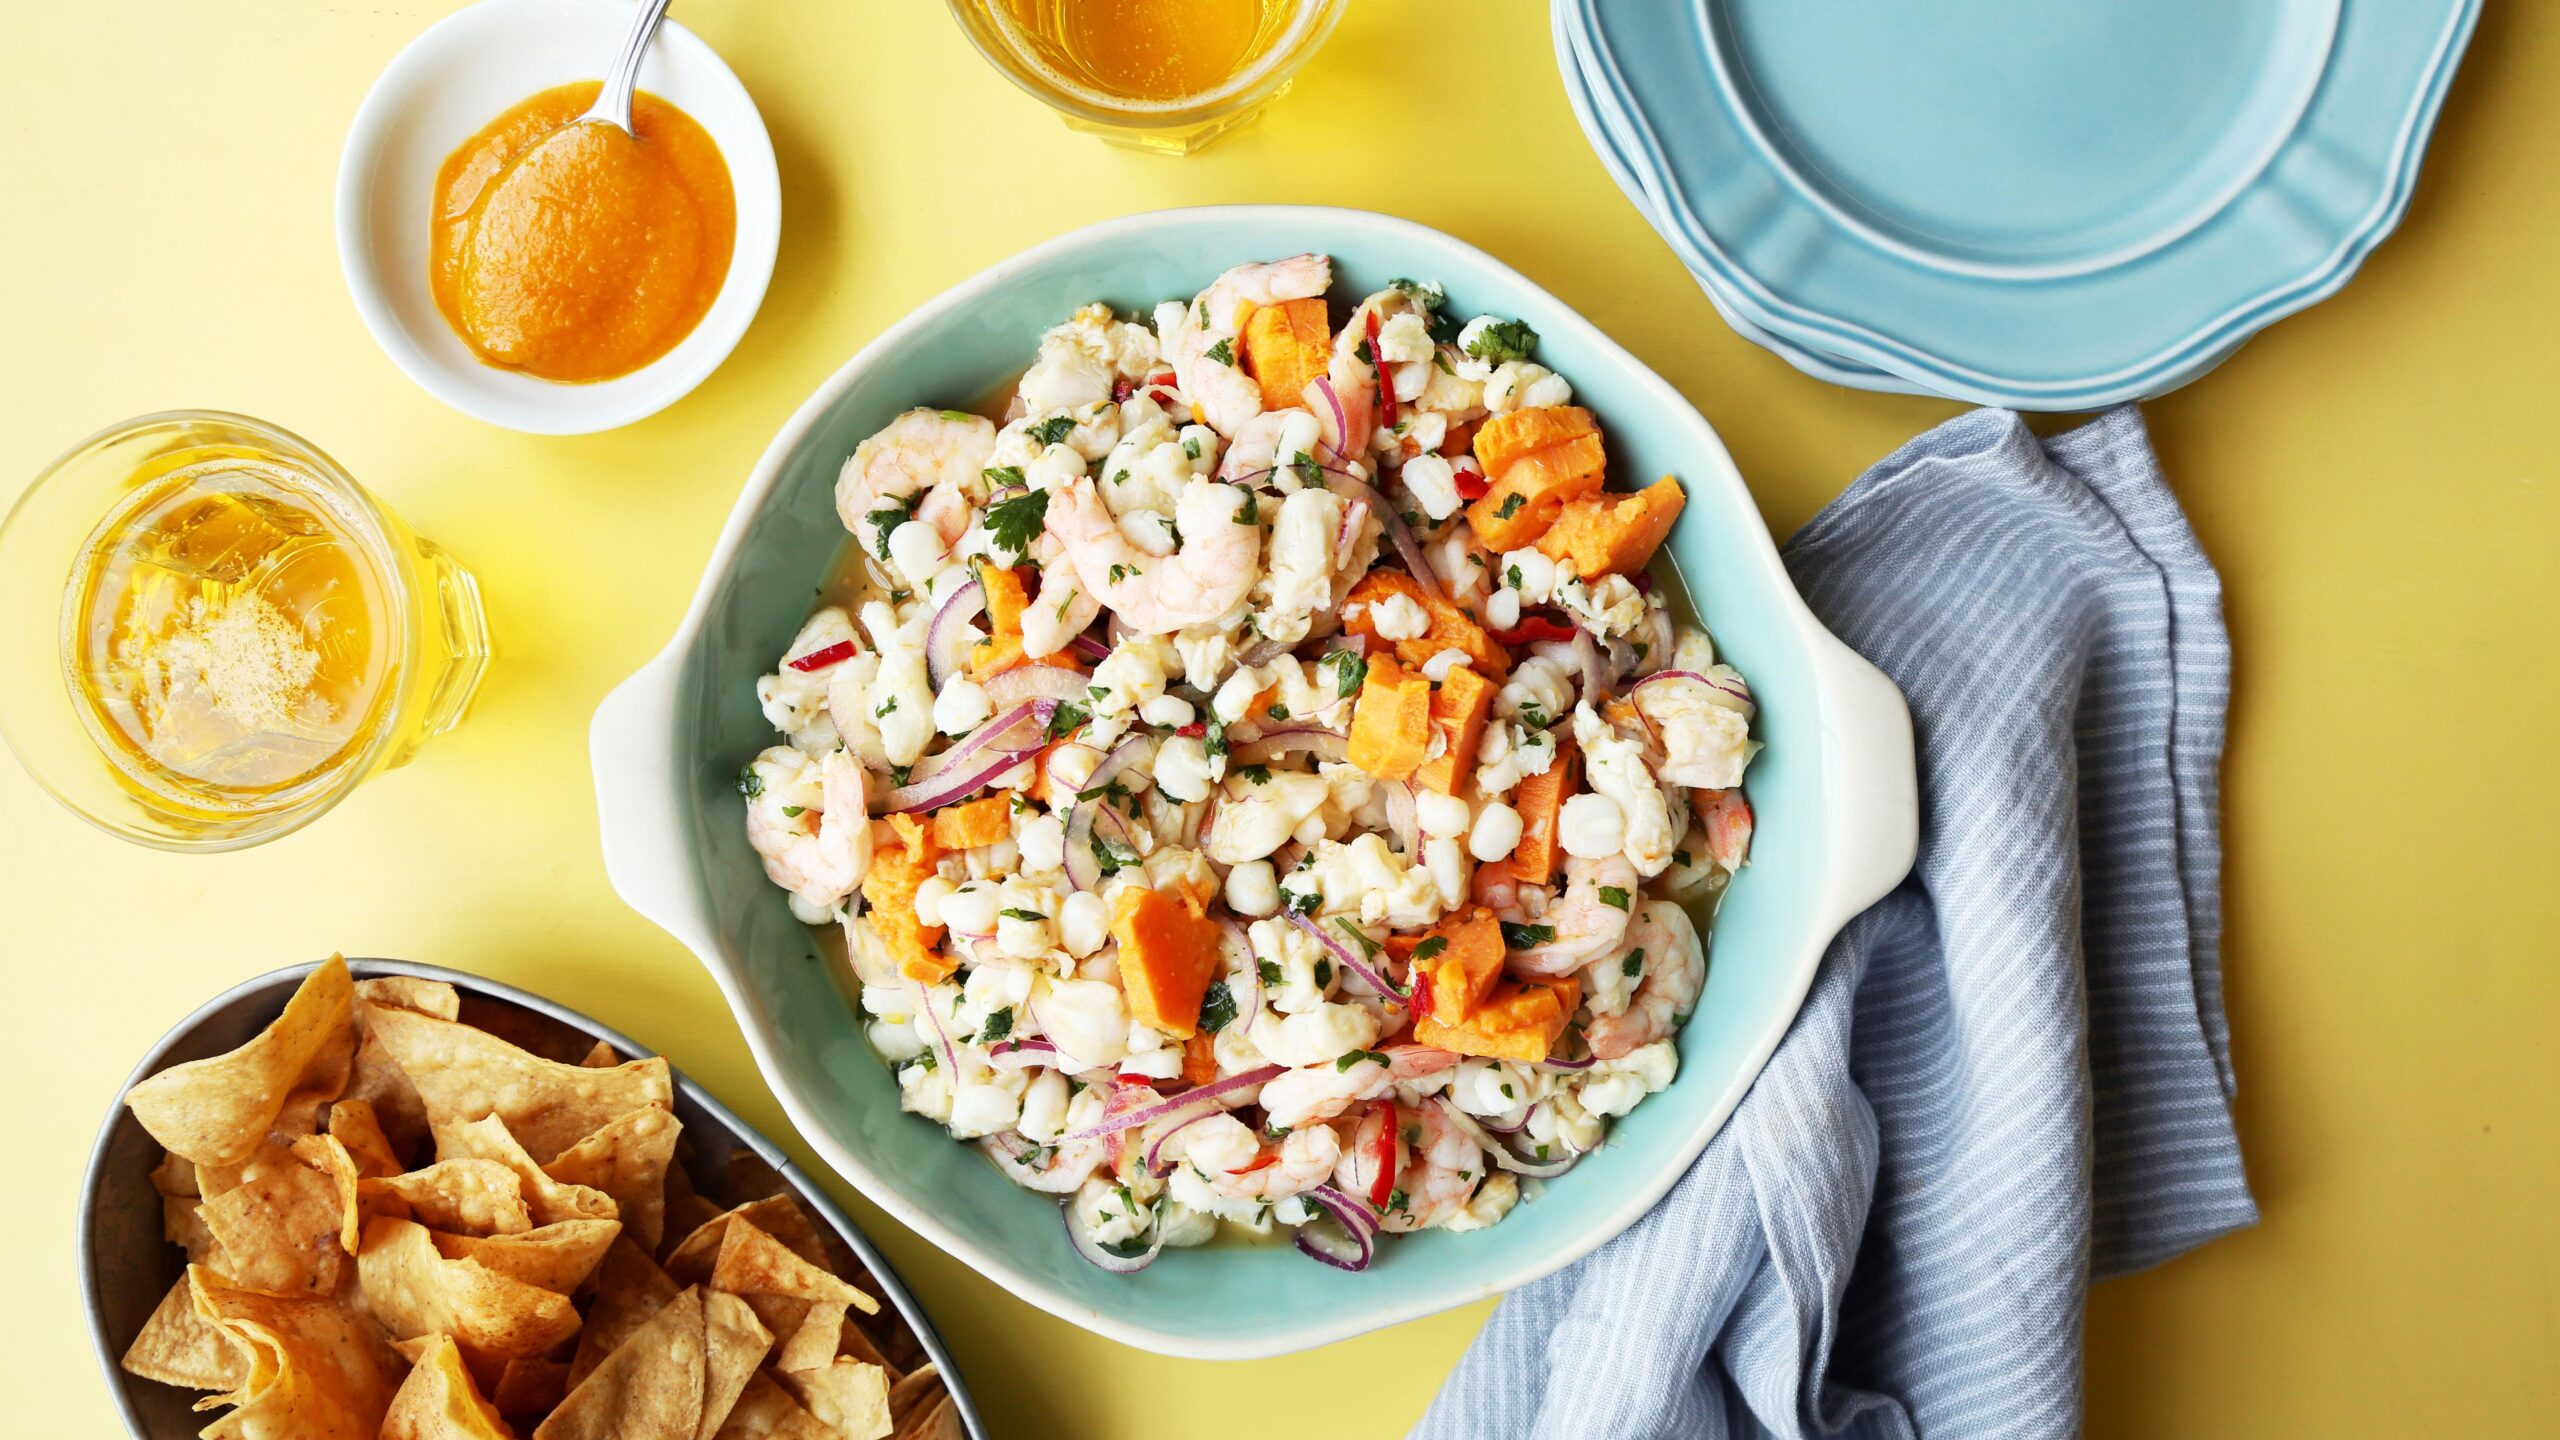  Our ceviche recipe is packed with protein and antioxidants that will leave you feeling nourished and satisfied.